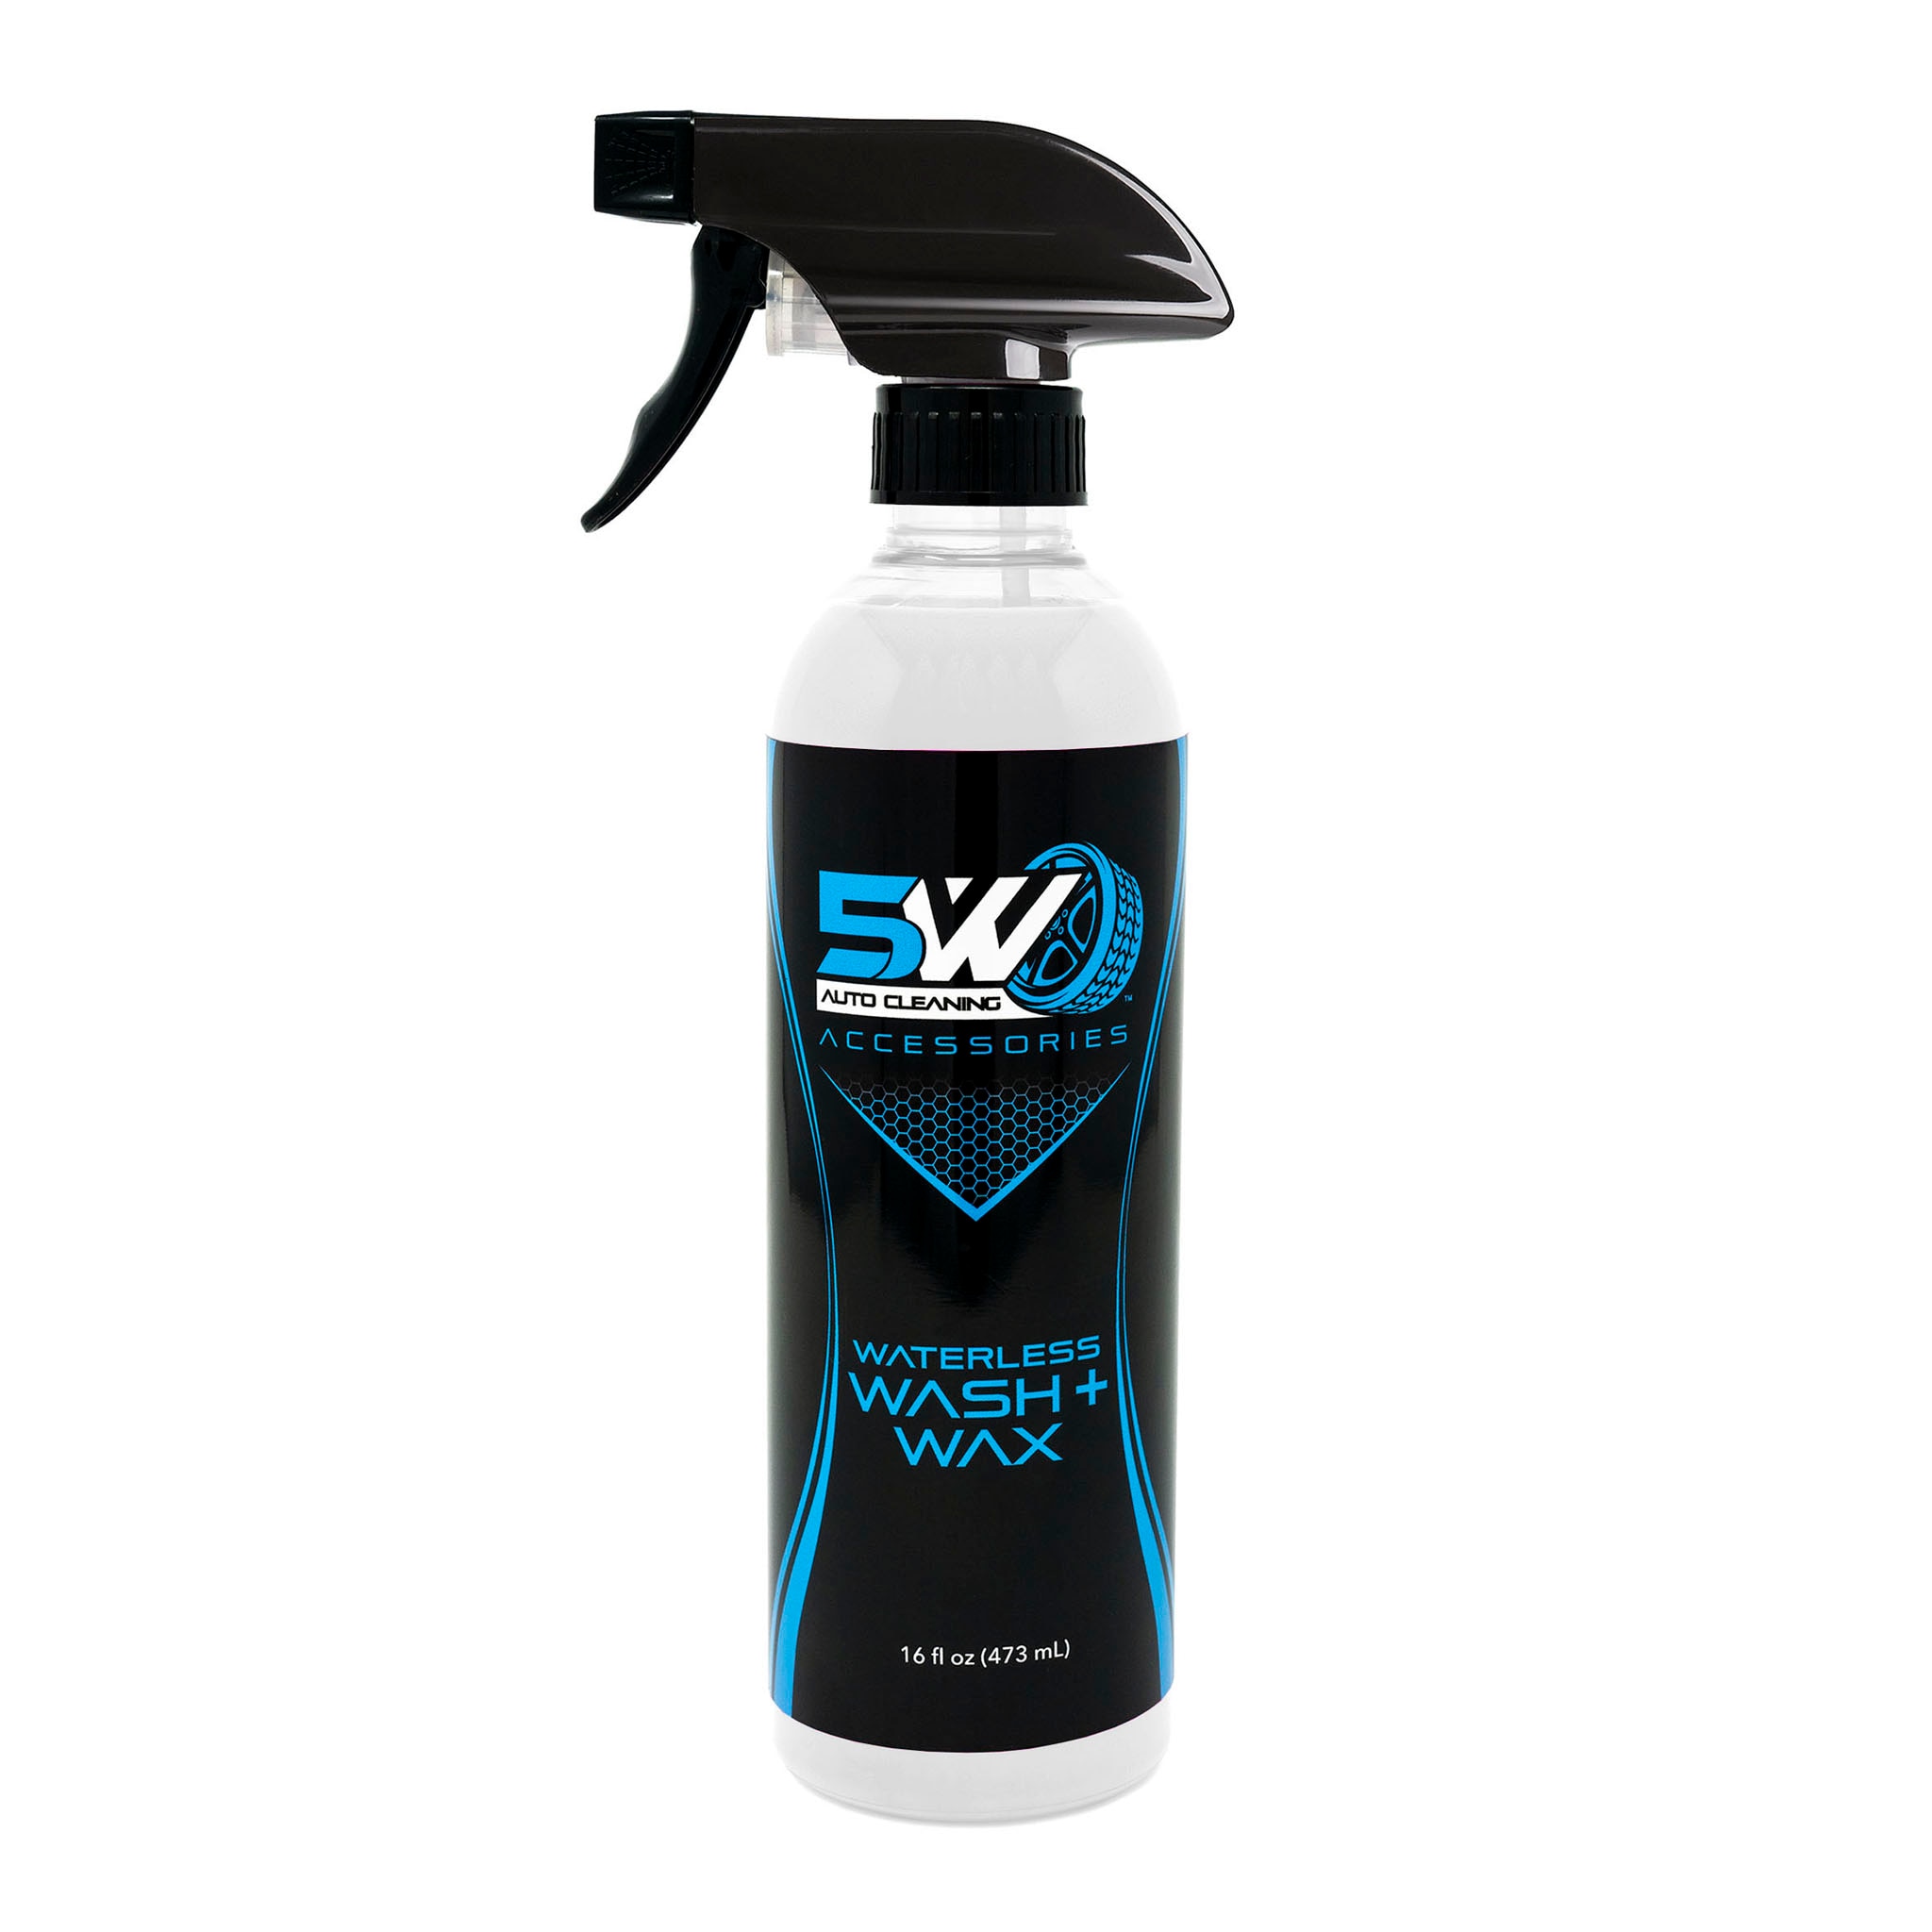 Adam's Wheel Cleaner 16oz - Tough Wheel Cleaning Spray for Car Wash  Detailing